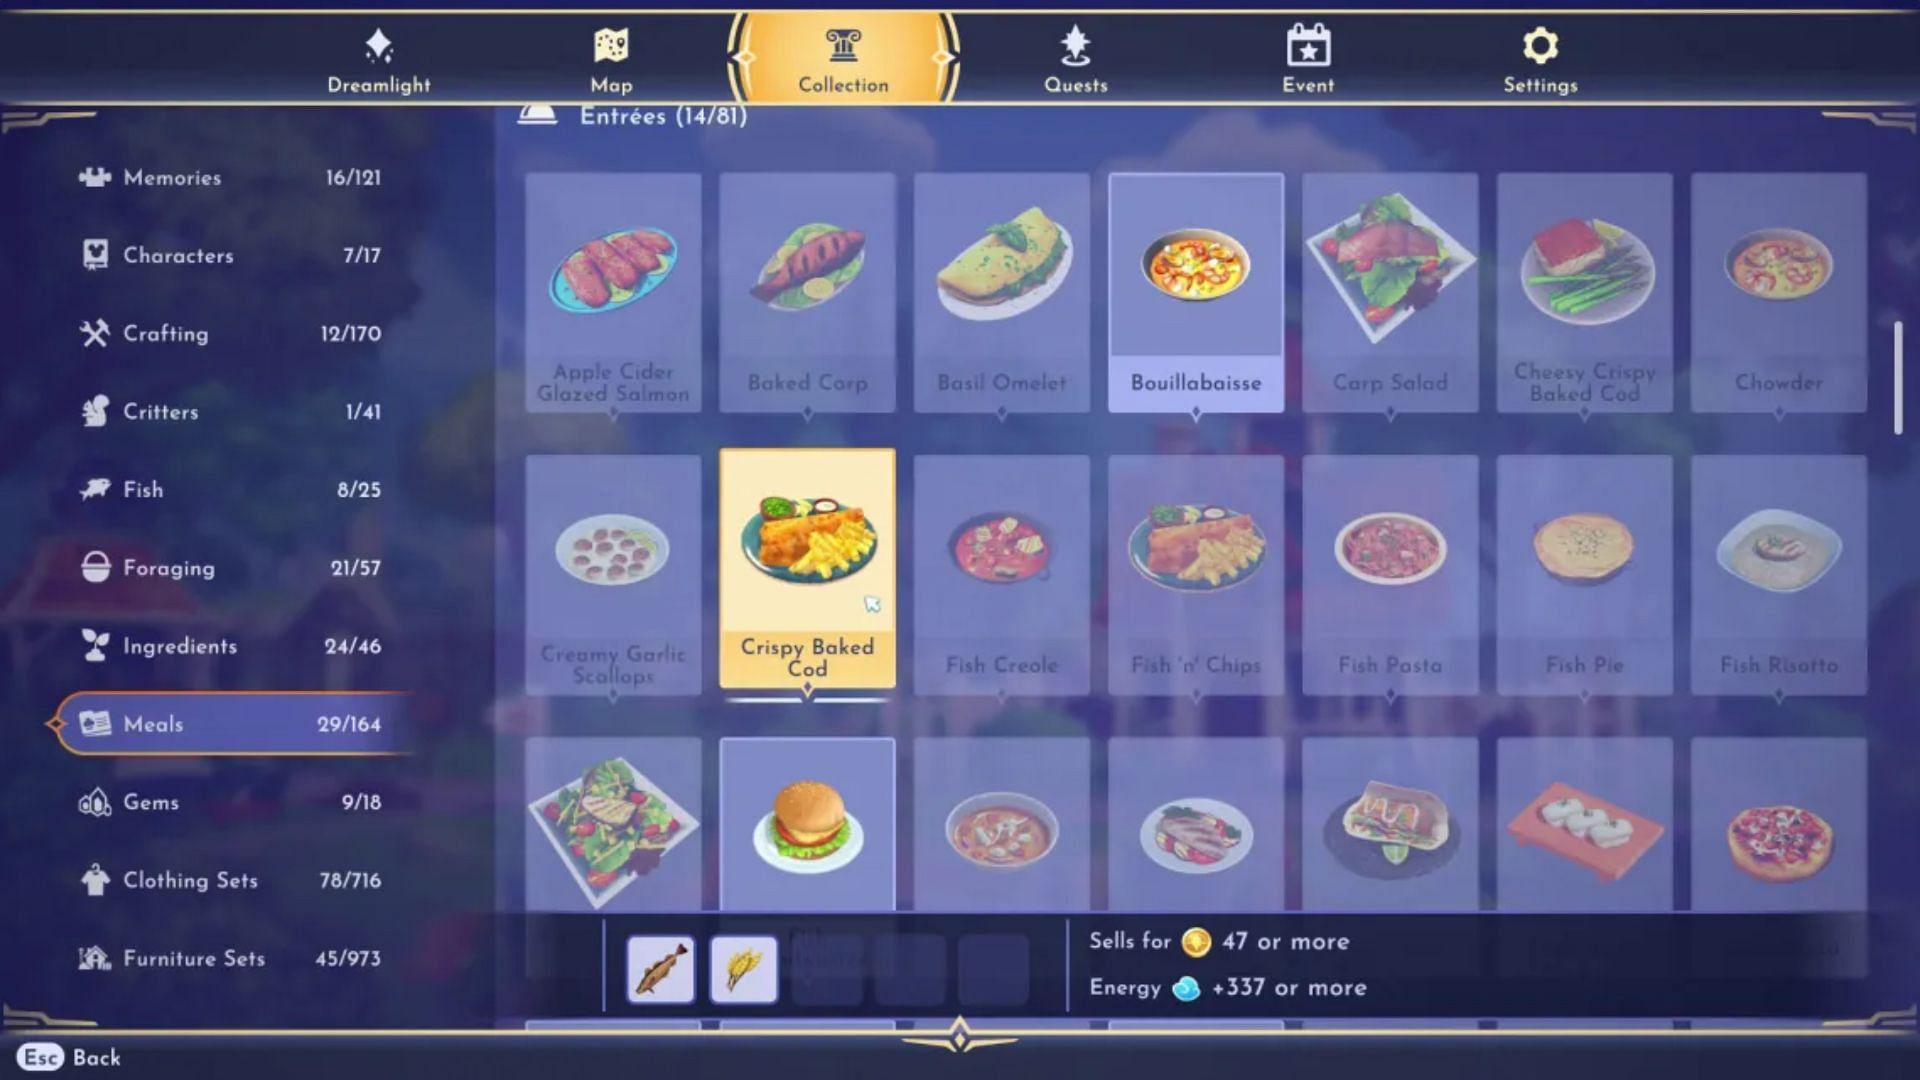 Some of the meals in the game (Image via Gameloft)